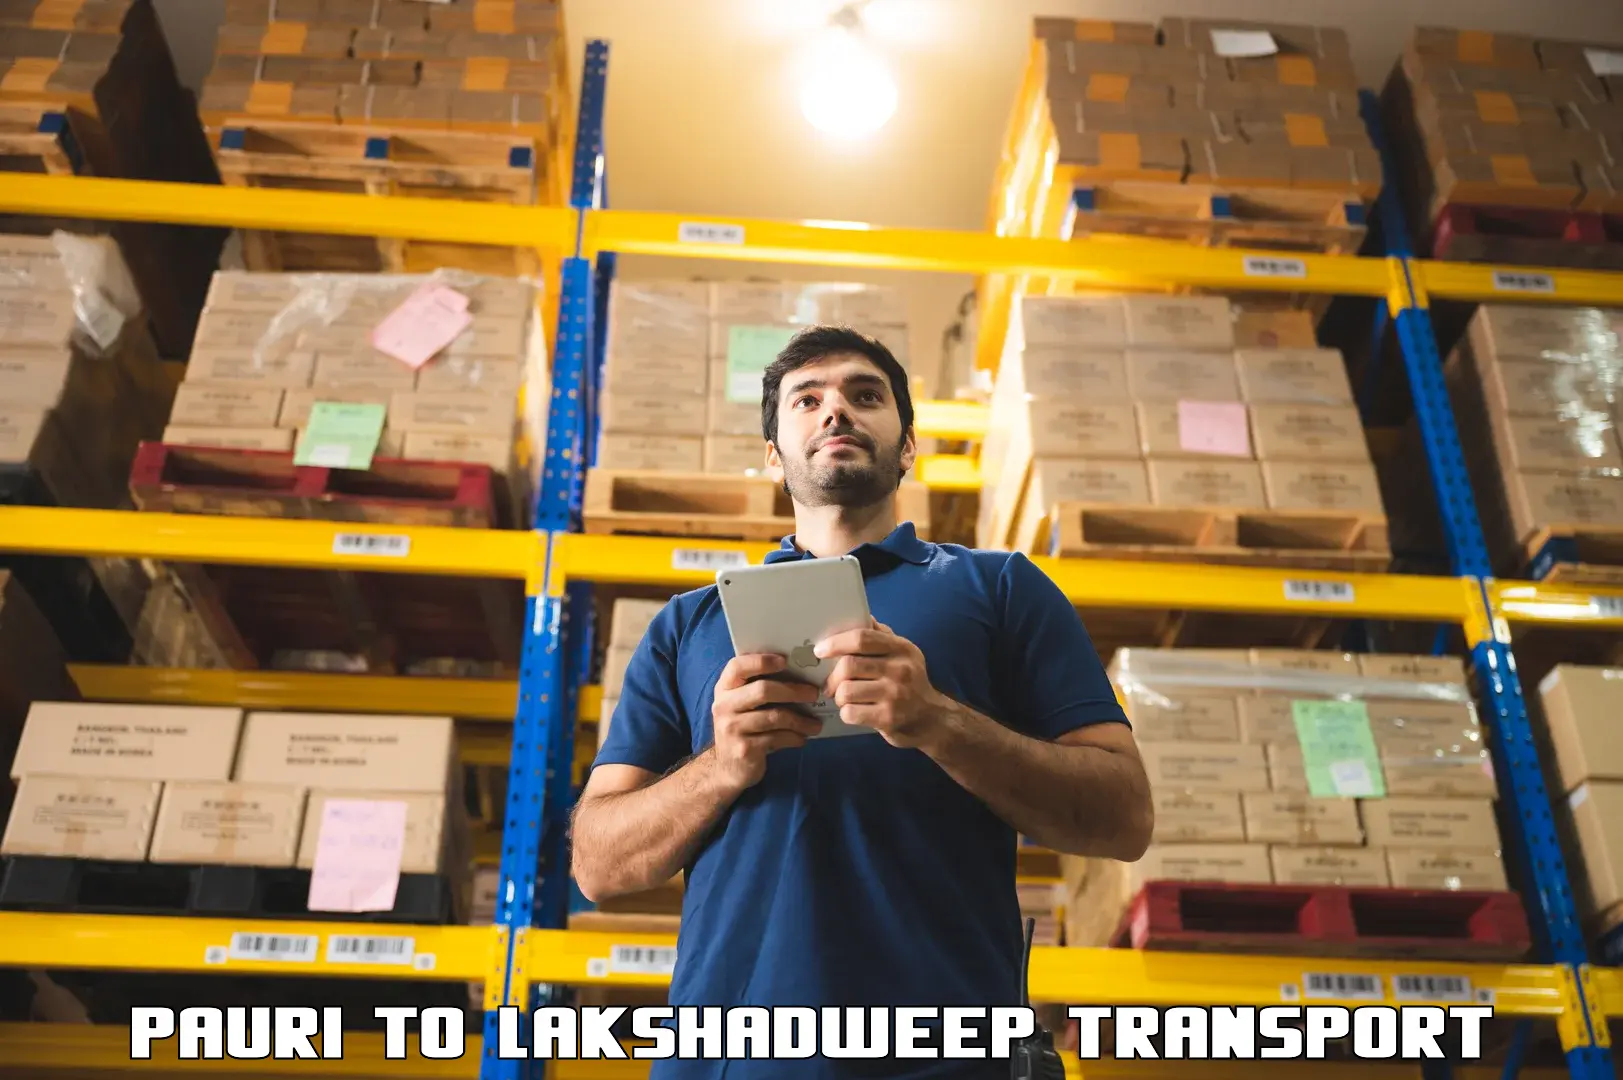 Express transport services Pauri to Lakshadweep